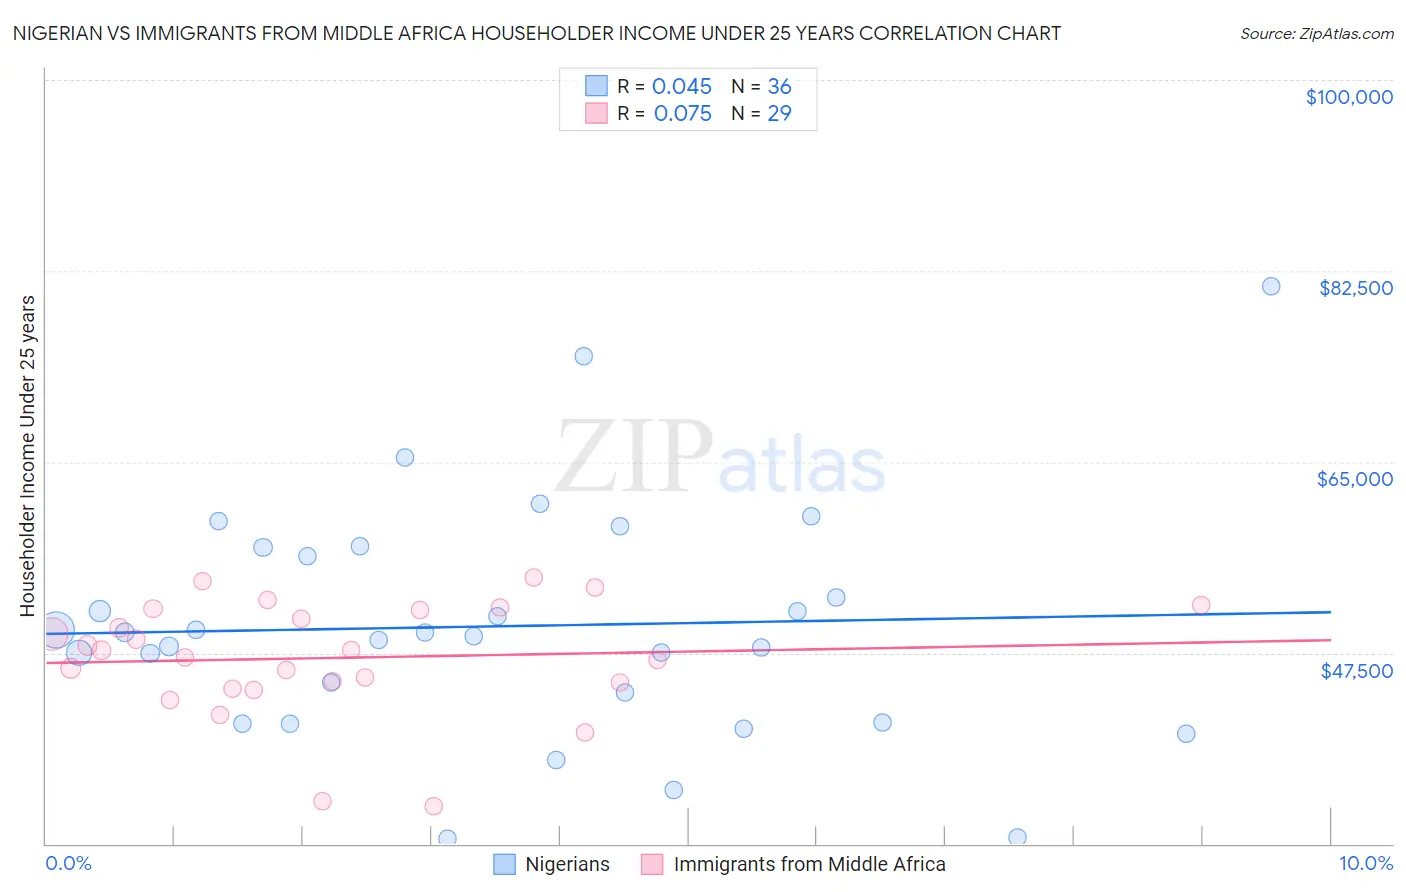 Nigerian vs Immigrants from Middle Africa Householder Income Under 25 years